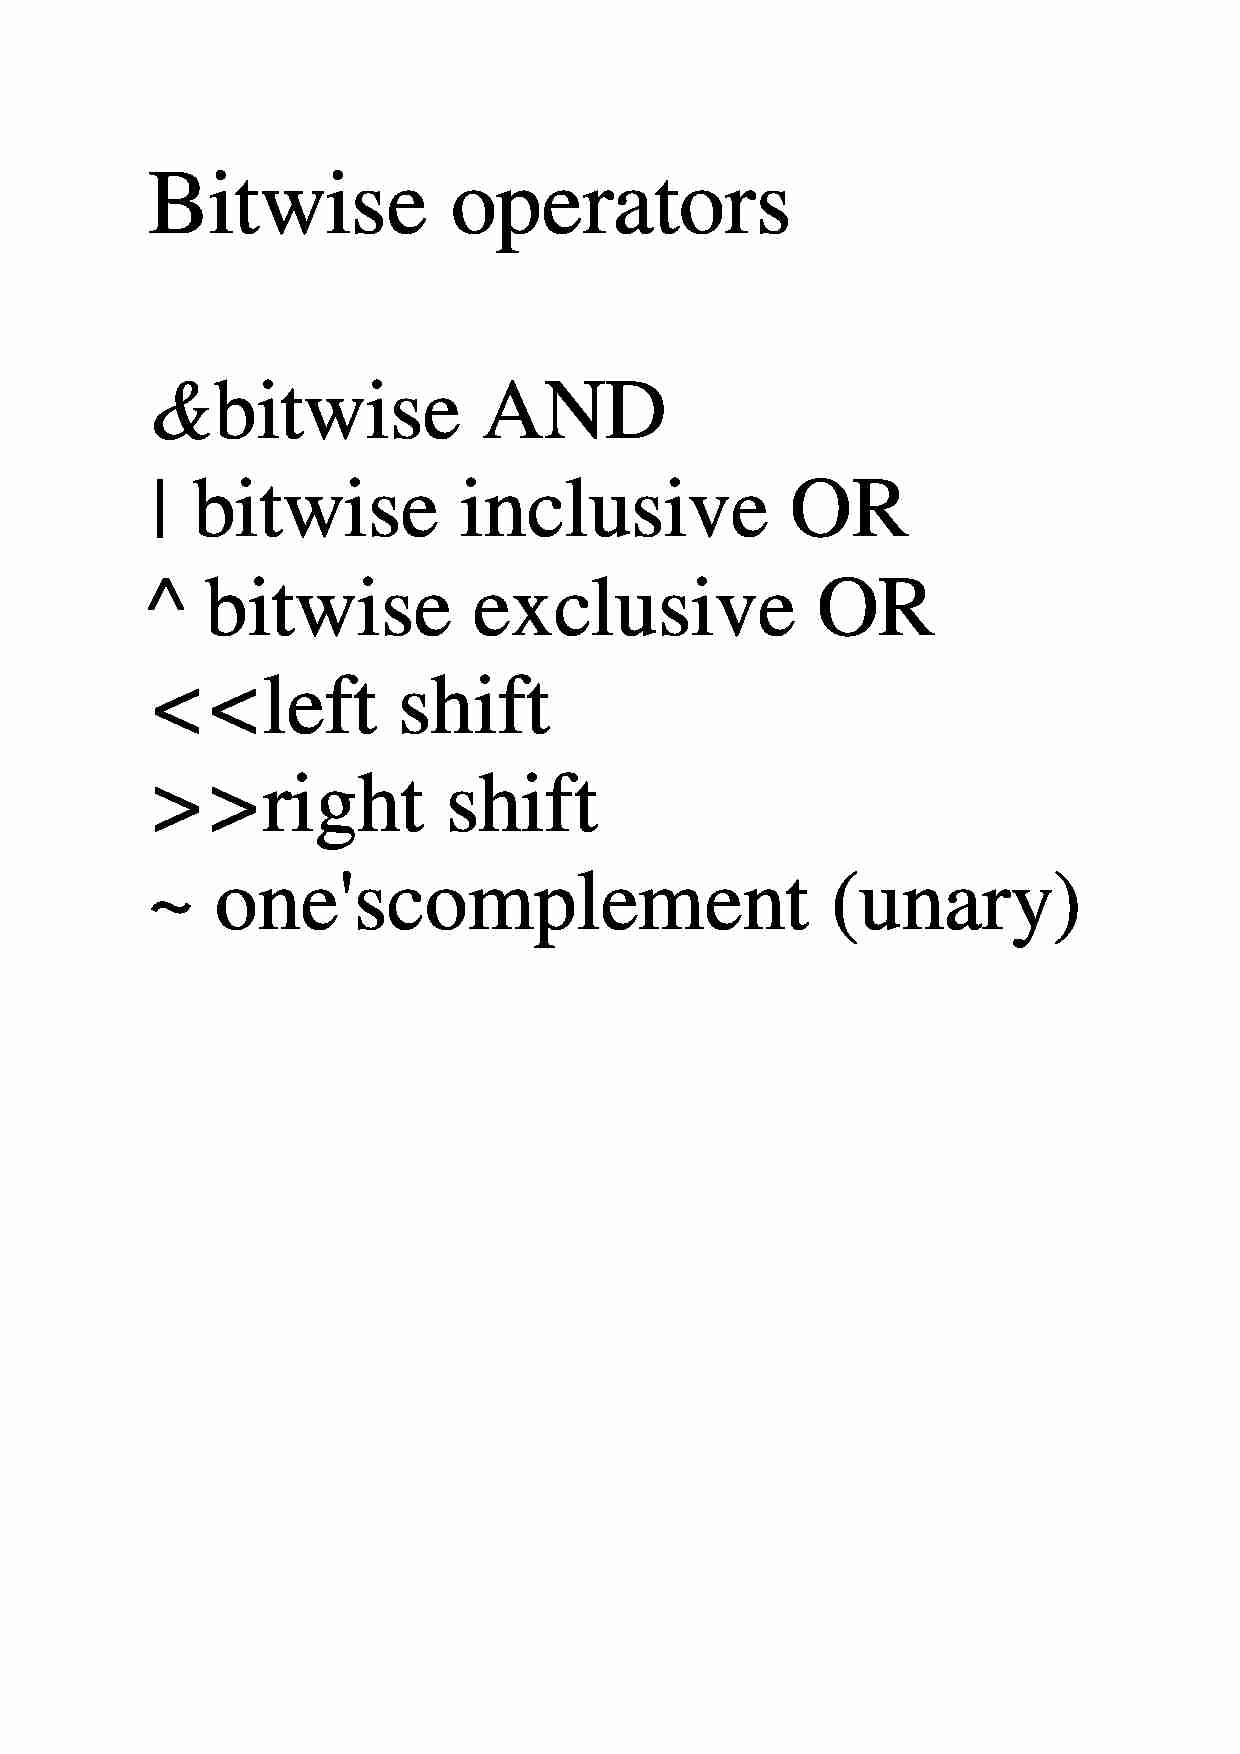 Bitwise operators & bitwise AND - examples - strona 1